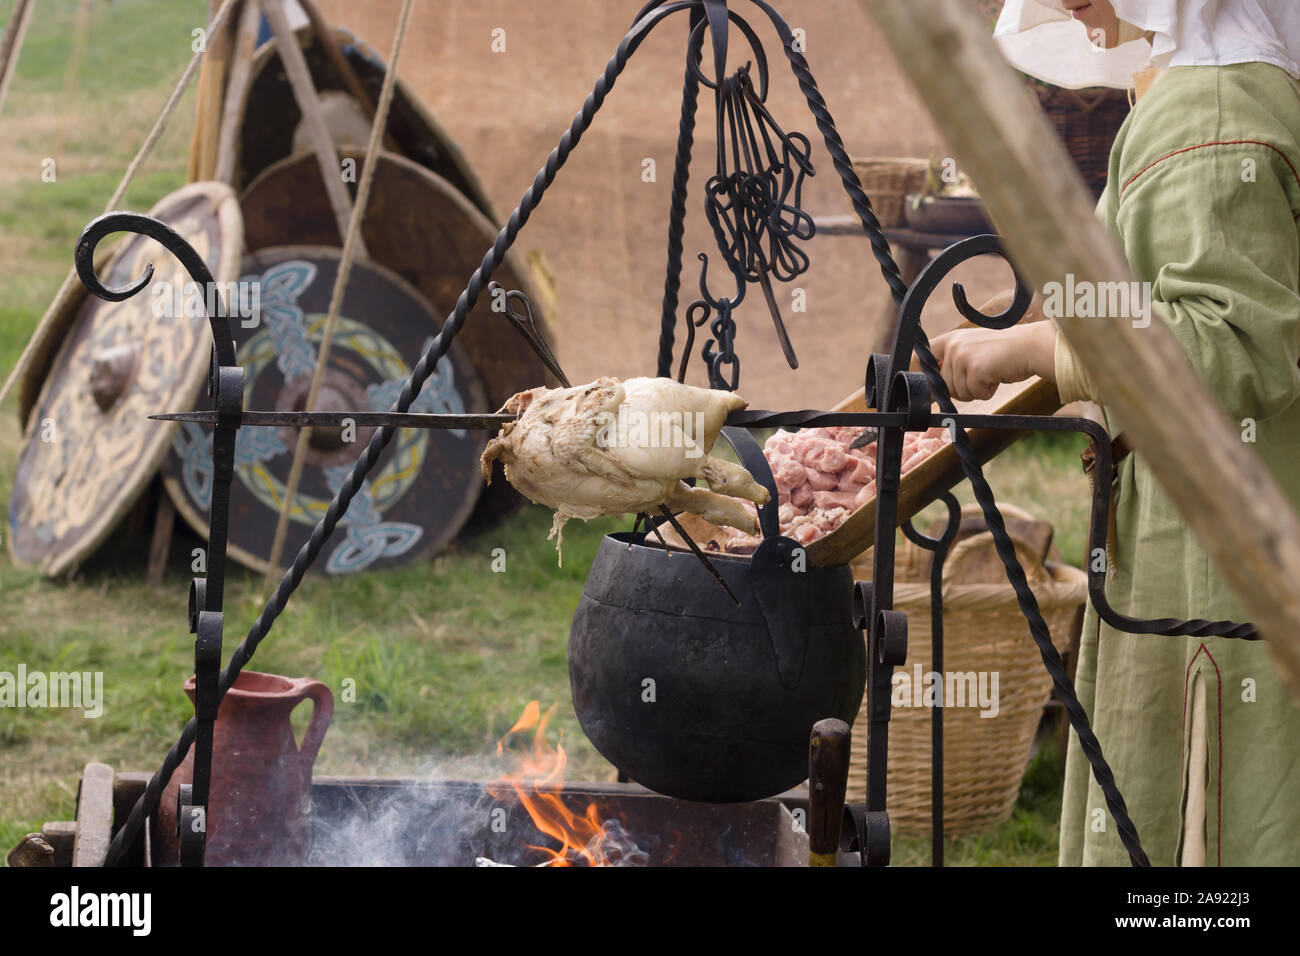 Woman dressed in medieval costume preparing food at a re-enactment camp with a spit roasted chicken and cauldron Stock Photo